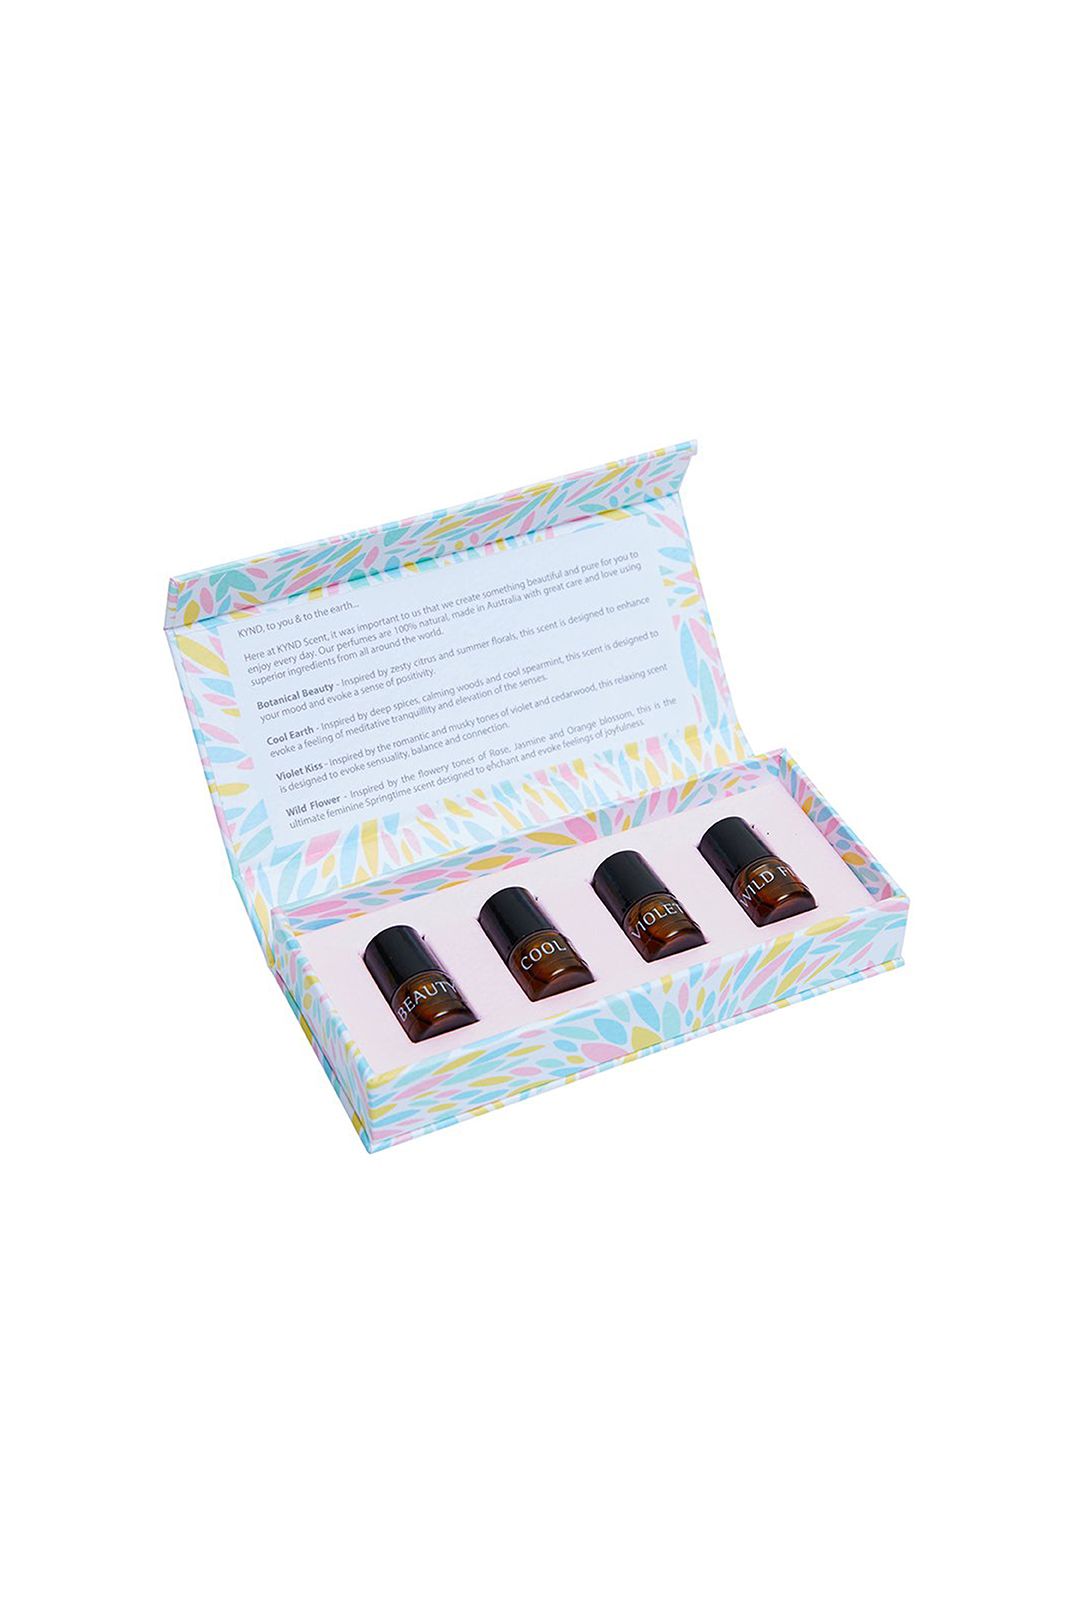 kynd-scent-small-sample-pack-product-2